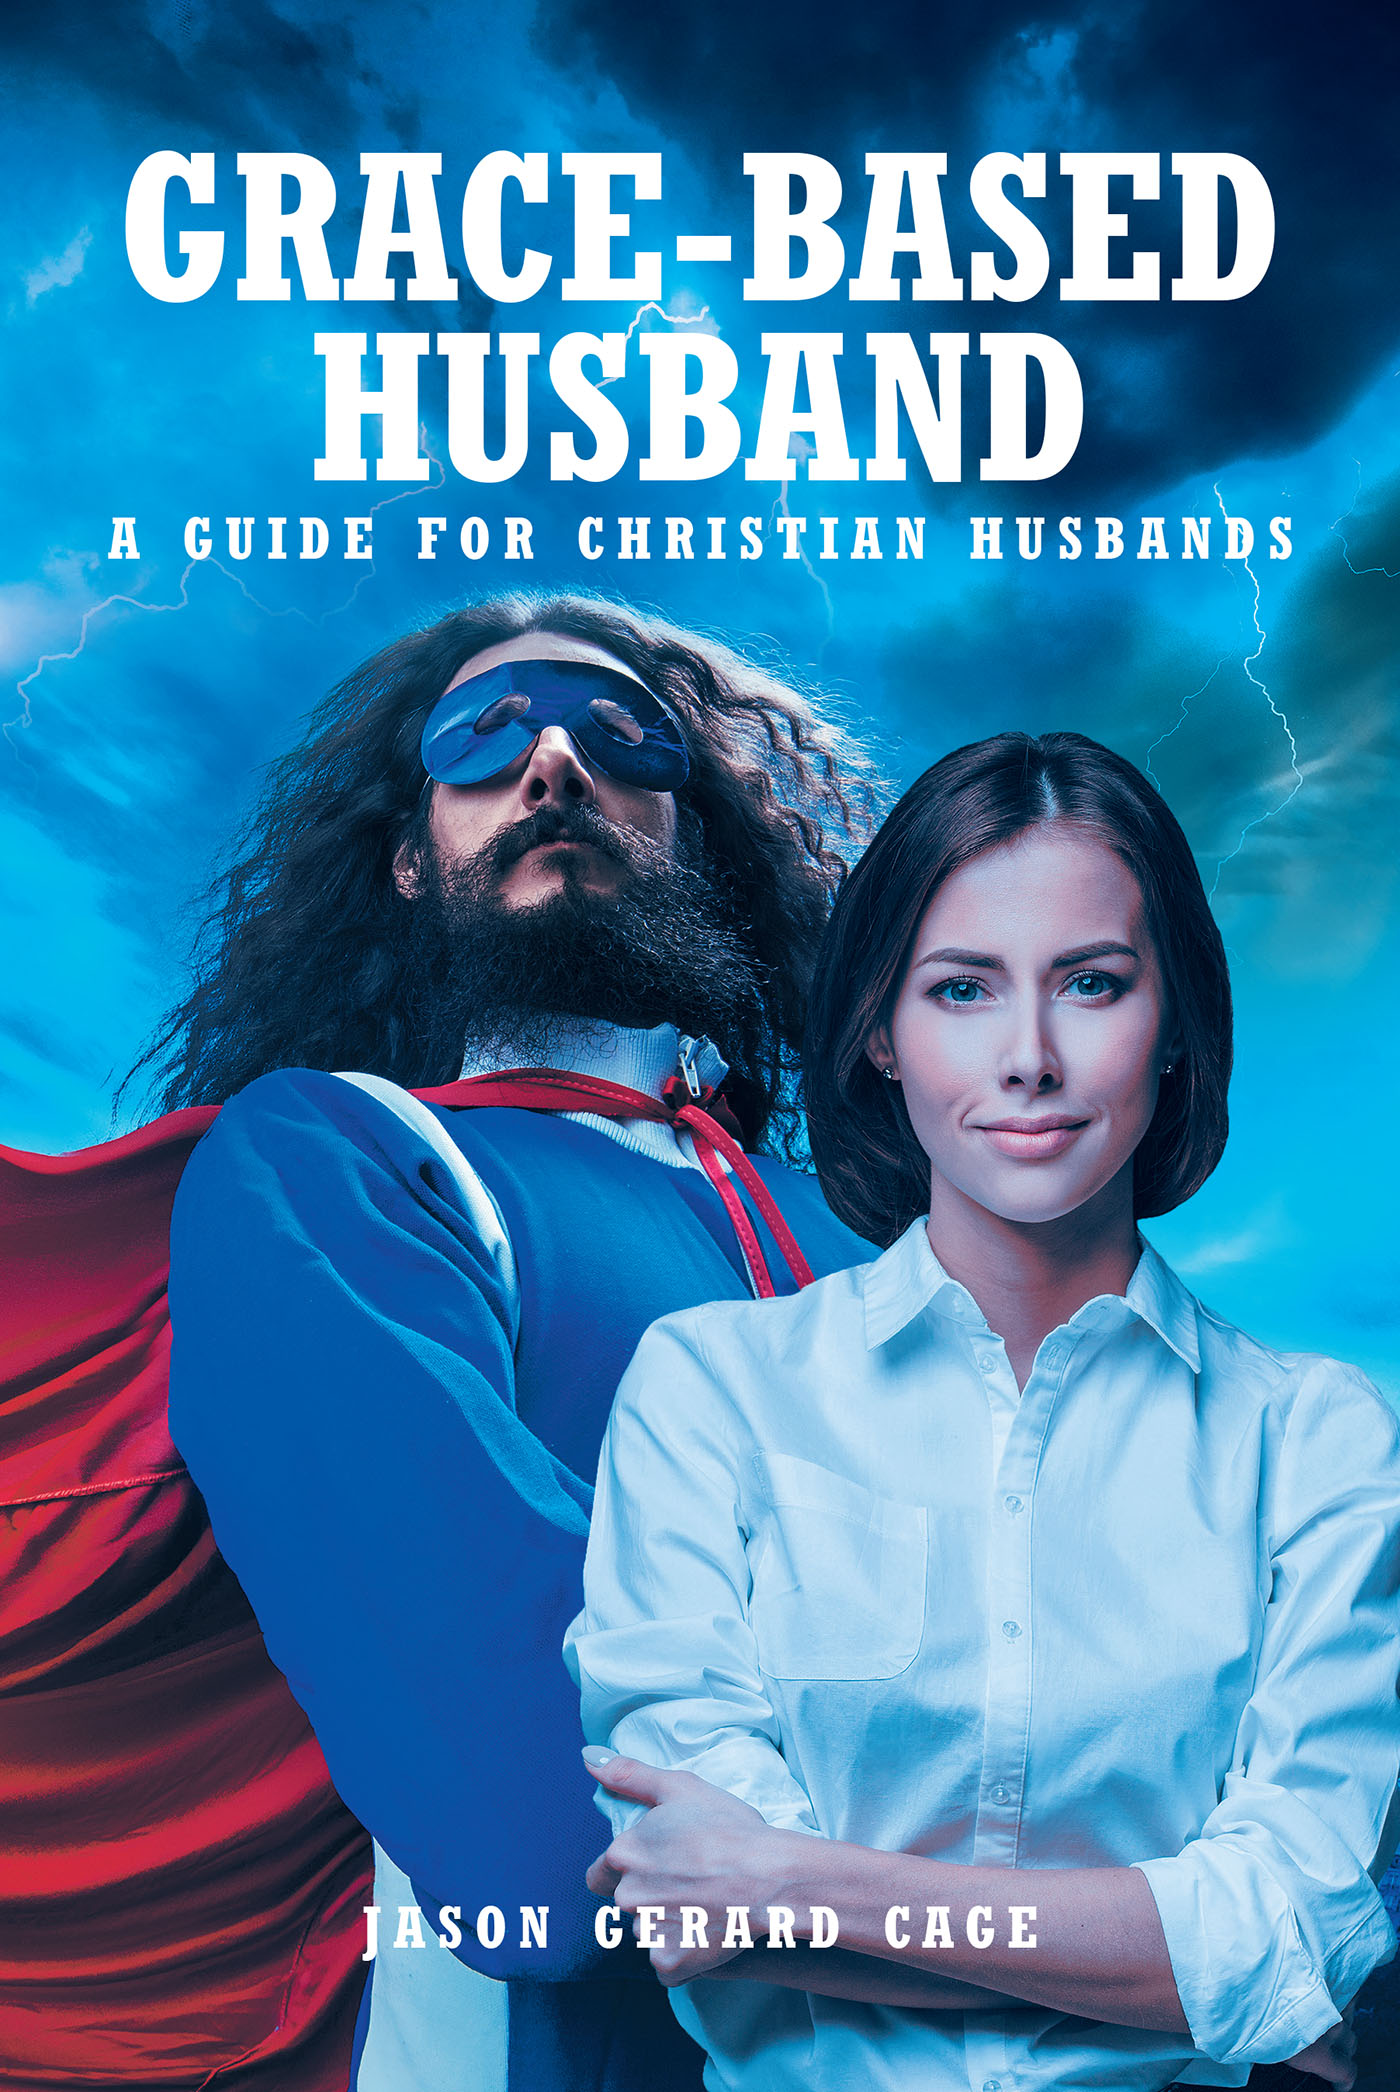 Jason Gerard Cage’s Newly Released “Grace-Based Husband: A Guide for Christian Husbands” is a Heartfelt Message of Encouragement